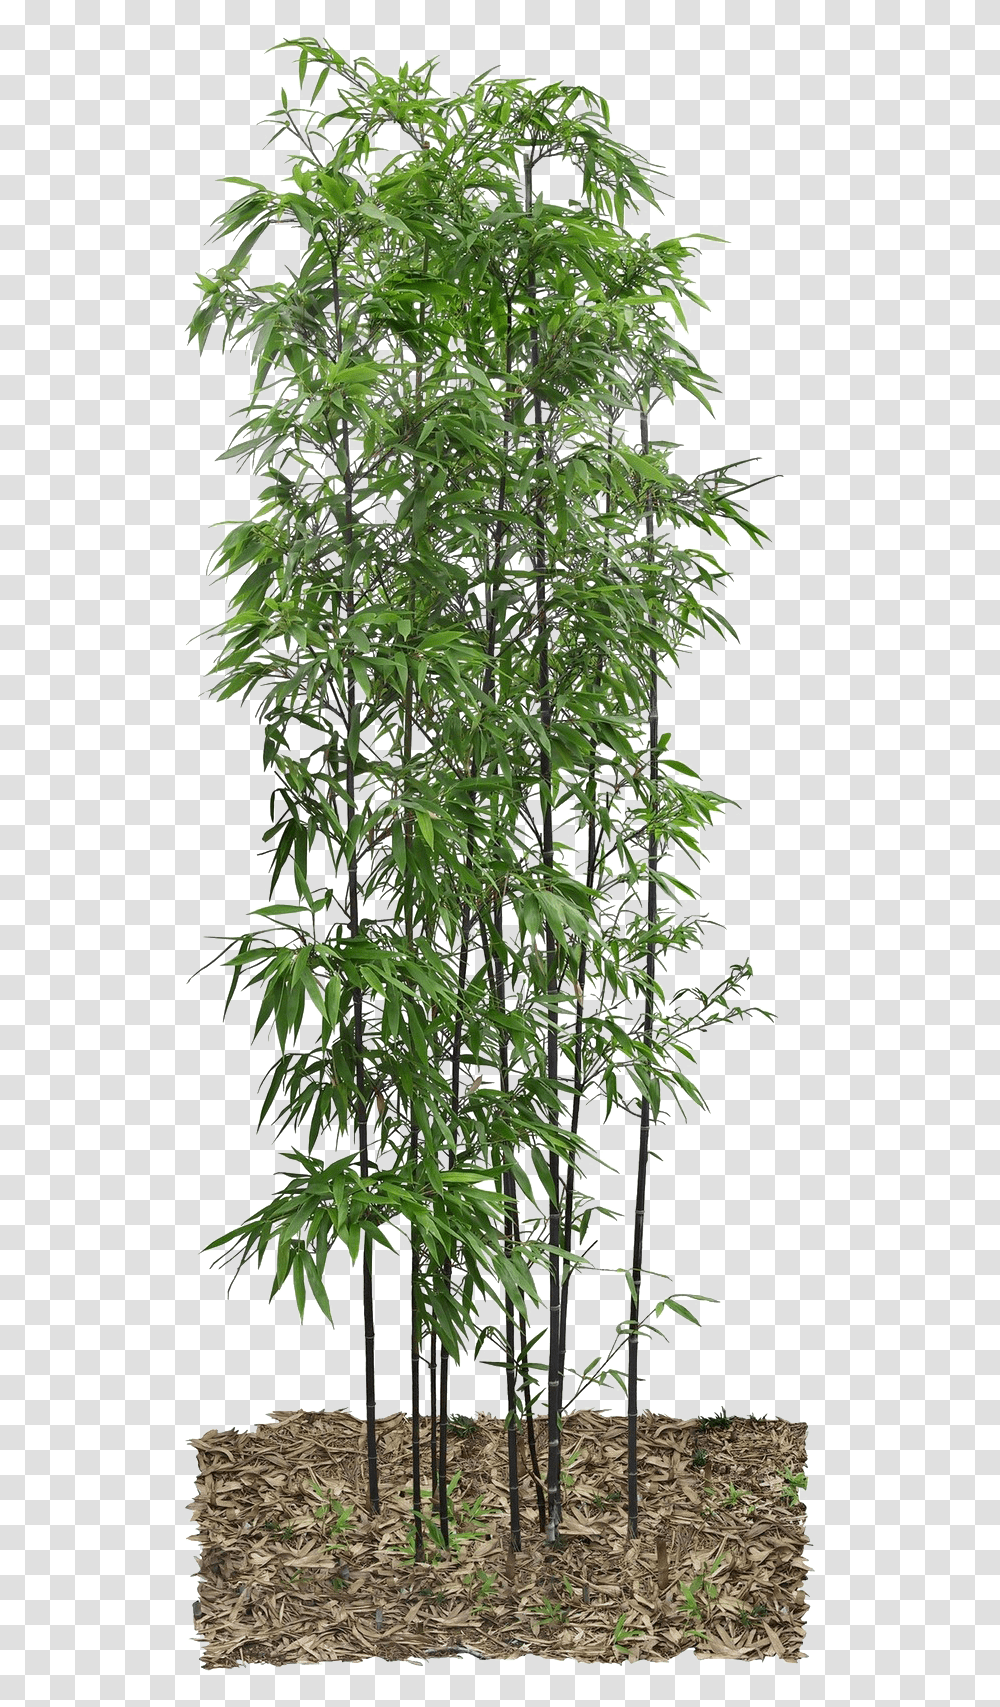 Real Bamboo Tree Images Bamboo, Plant, Vegetation, Bush, Potted Plant Transparent Png